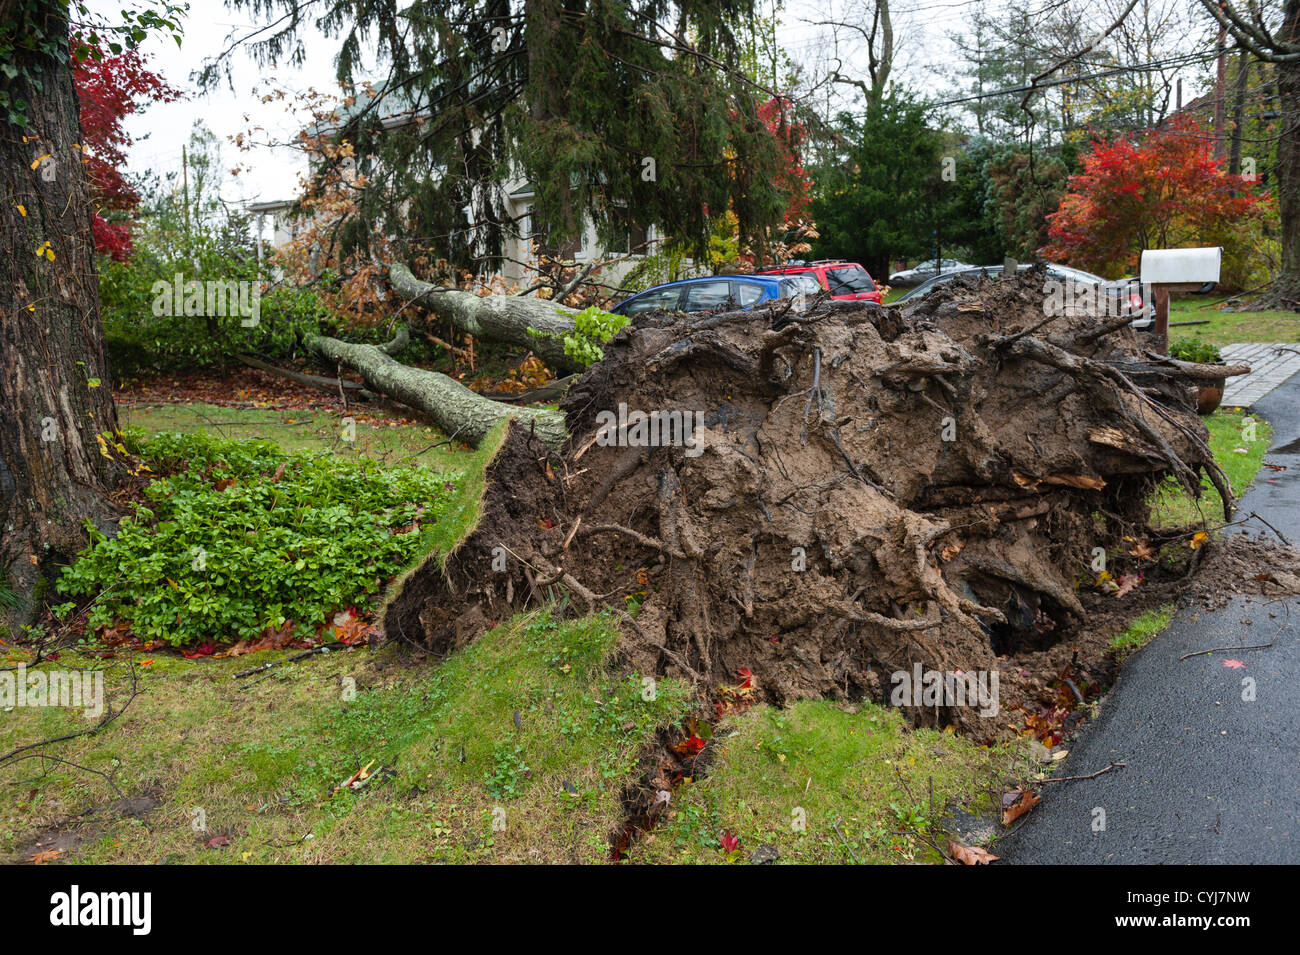 USA 30 Oct 2012 Hurricane force wind damage from tropical superstorm Hurricane Sandy uproots trees like this oak in Chappaqua NY Stock Photo